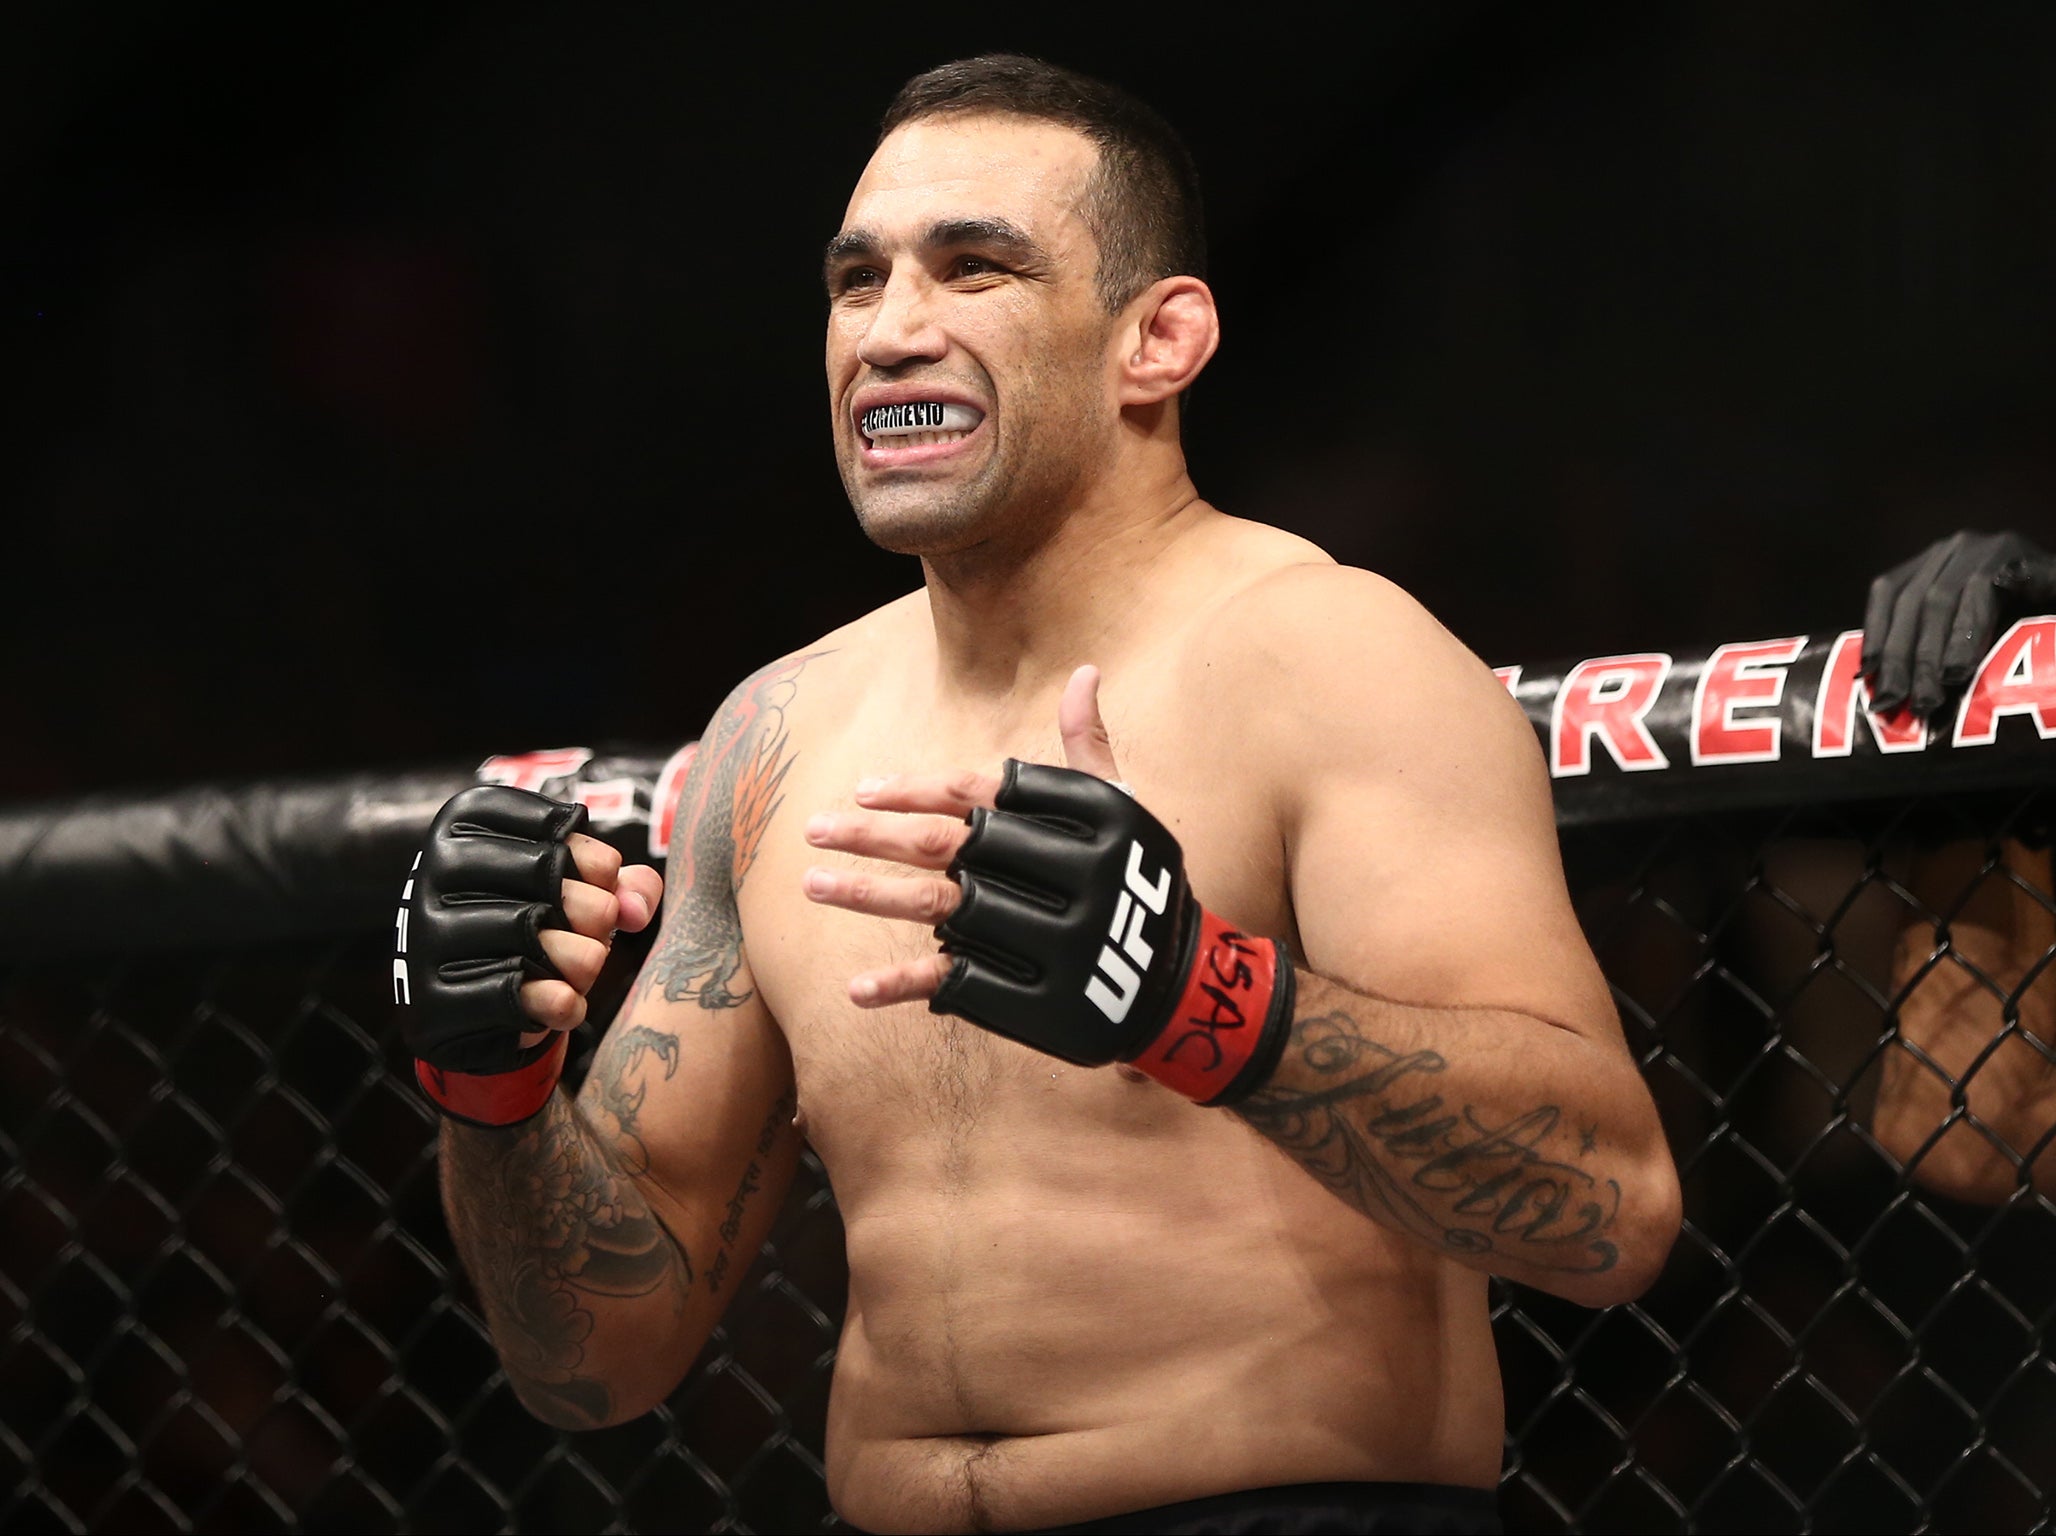 Werdum's Brazilian Jiu Jitsu is supported by an excellent level of Muay Thai striking